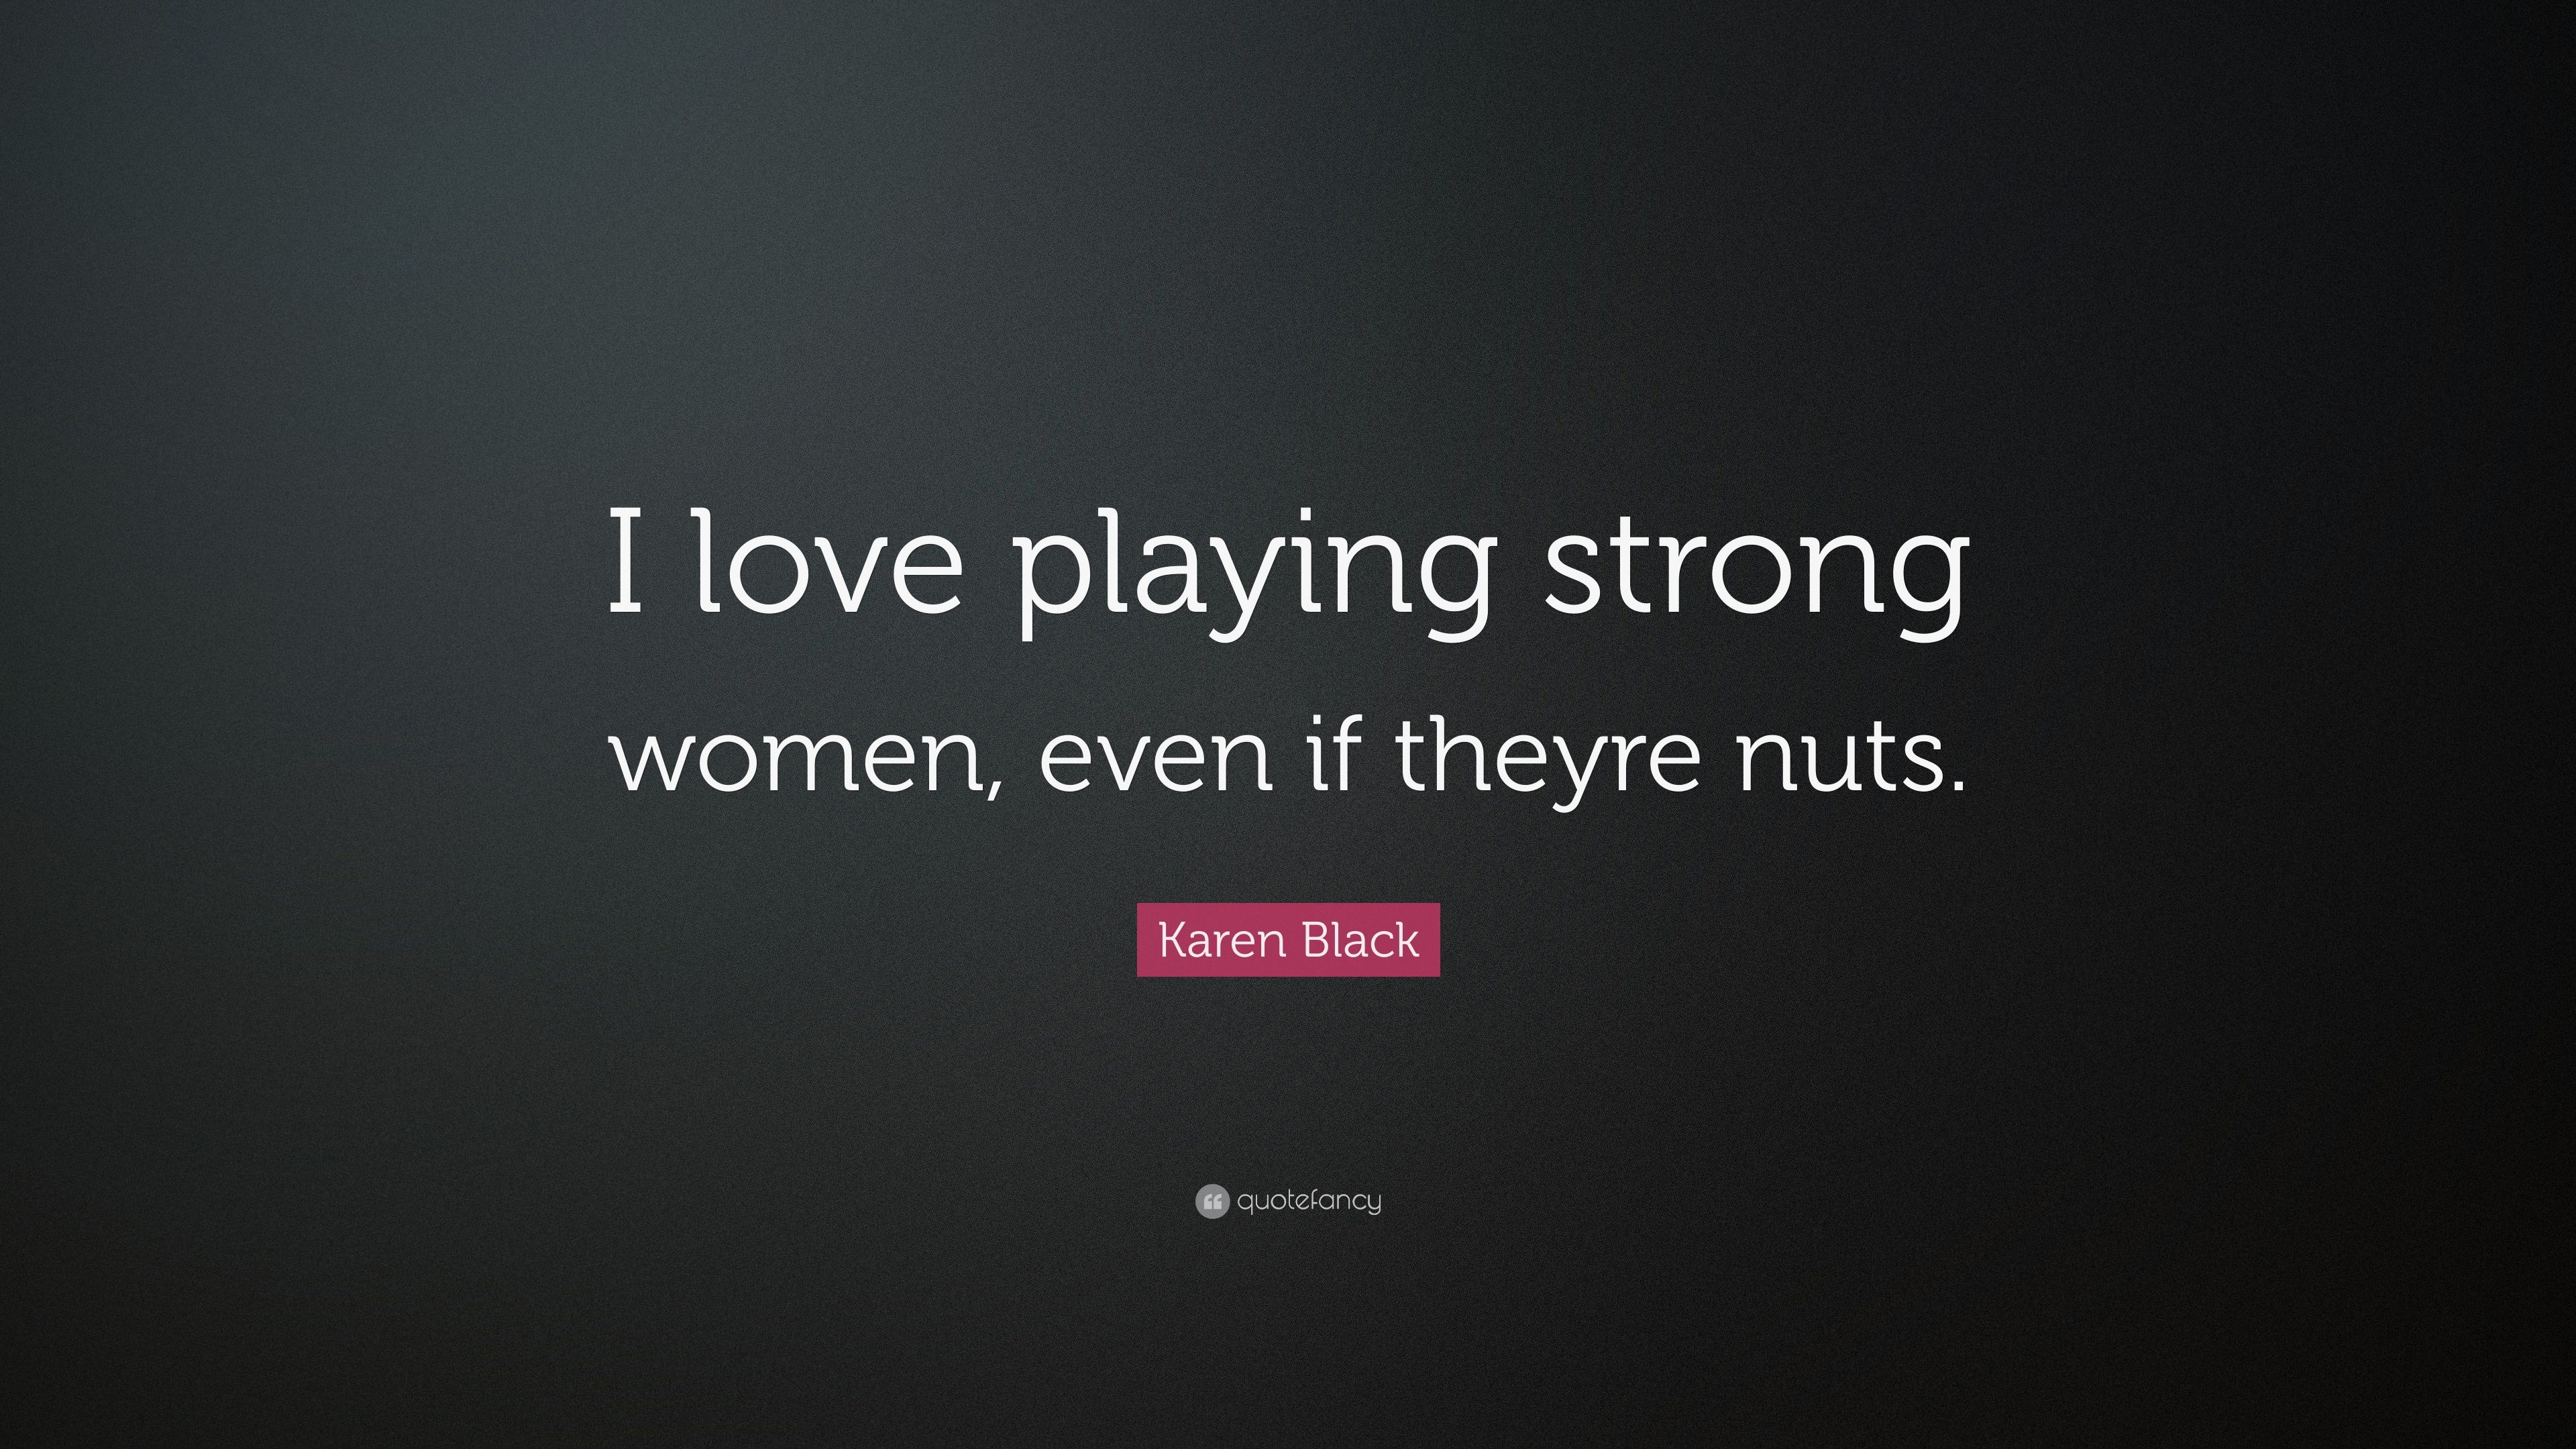 Karen Black Quote: “I love playing strong women, even if theyre nuts.” (7 wallpaper)